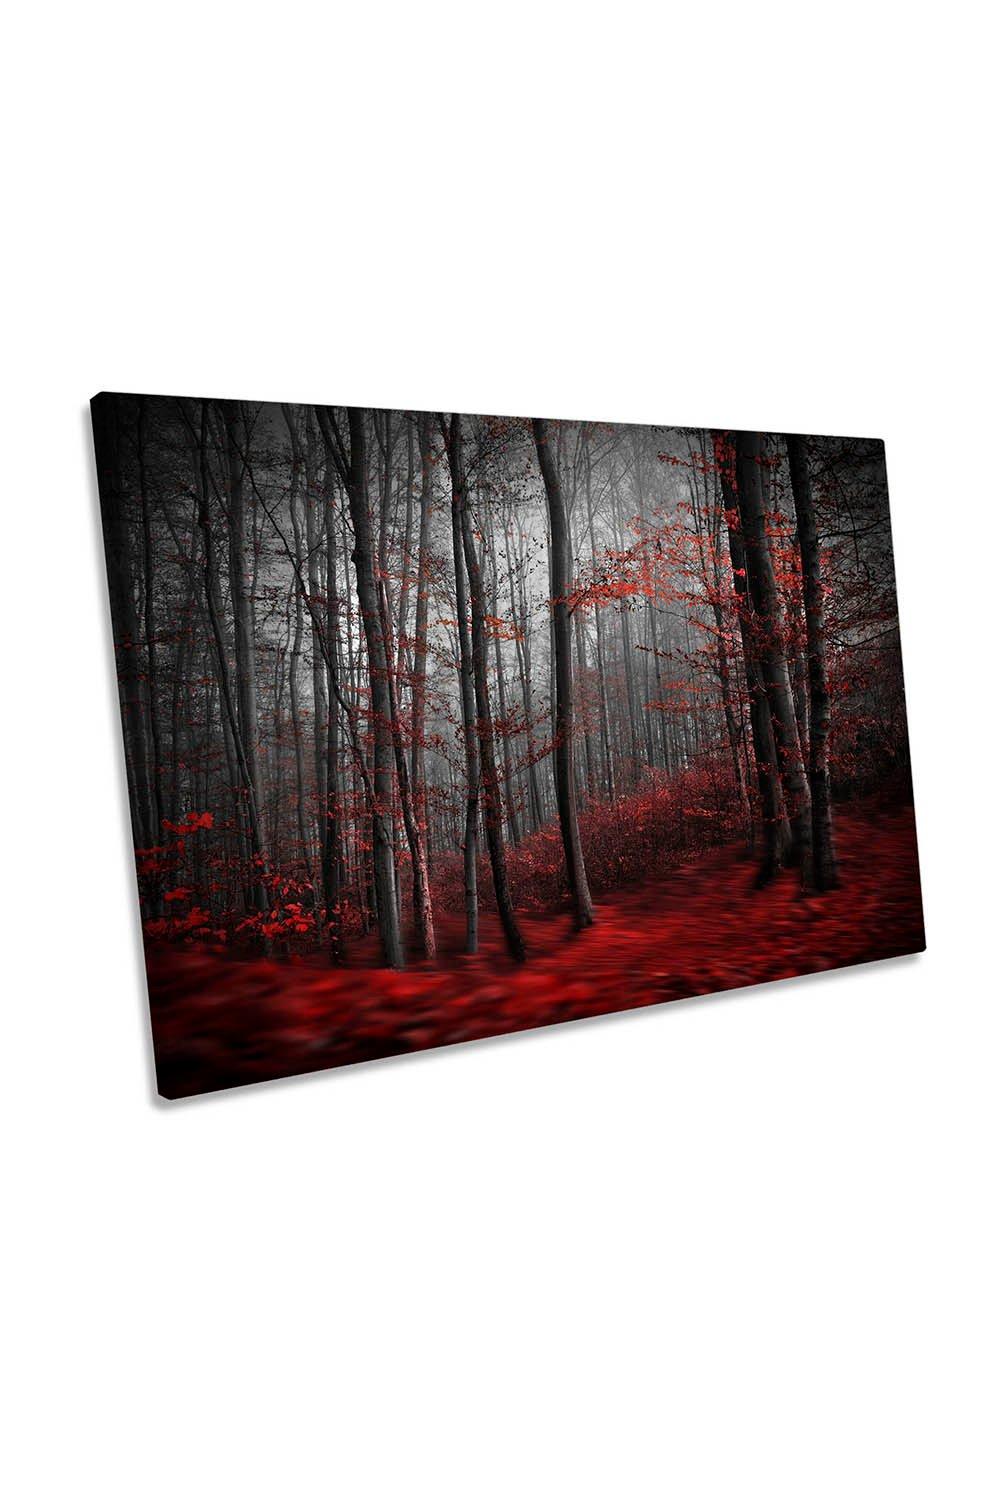 Bloody River Forest Red Autumn Canvas Wall Art Picture Print